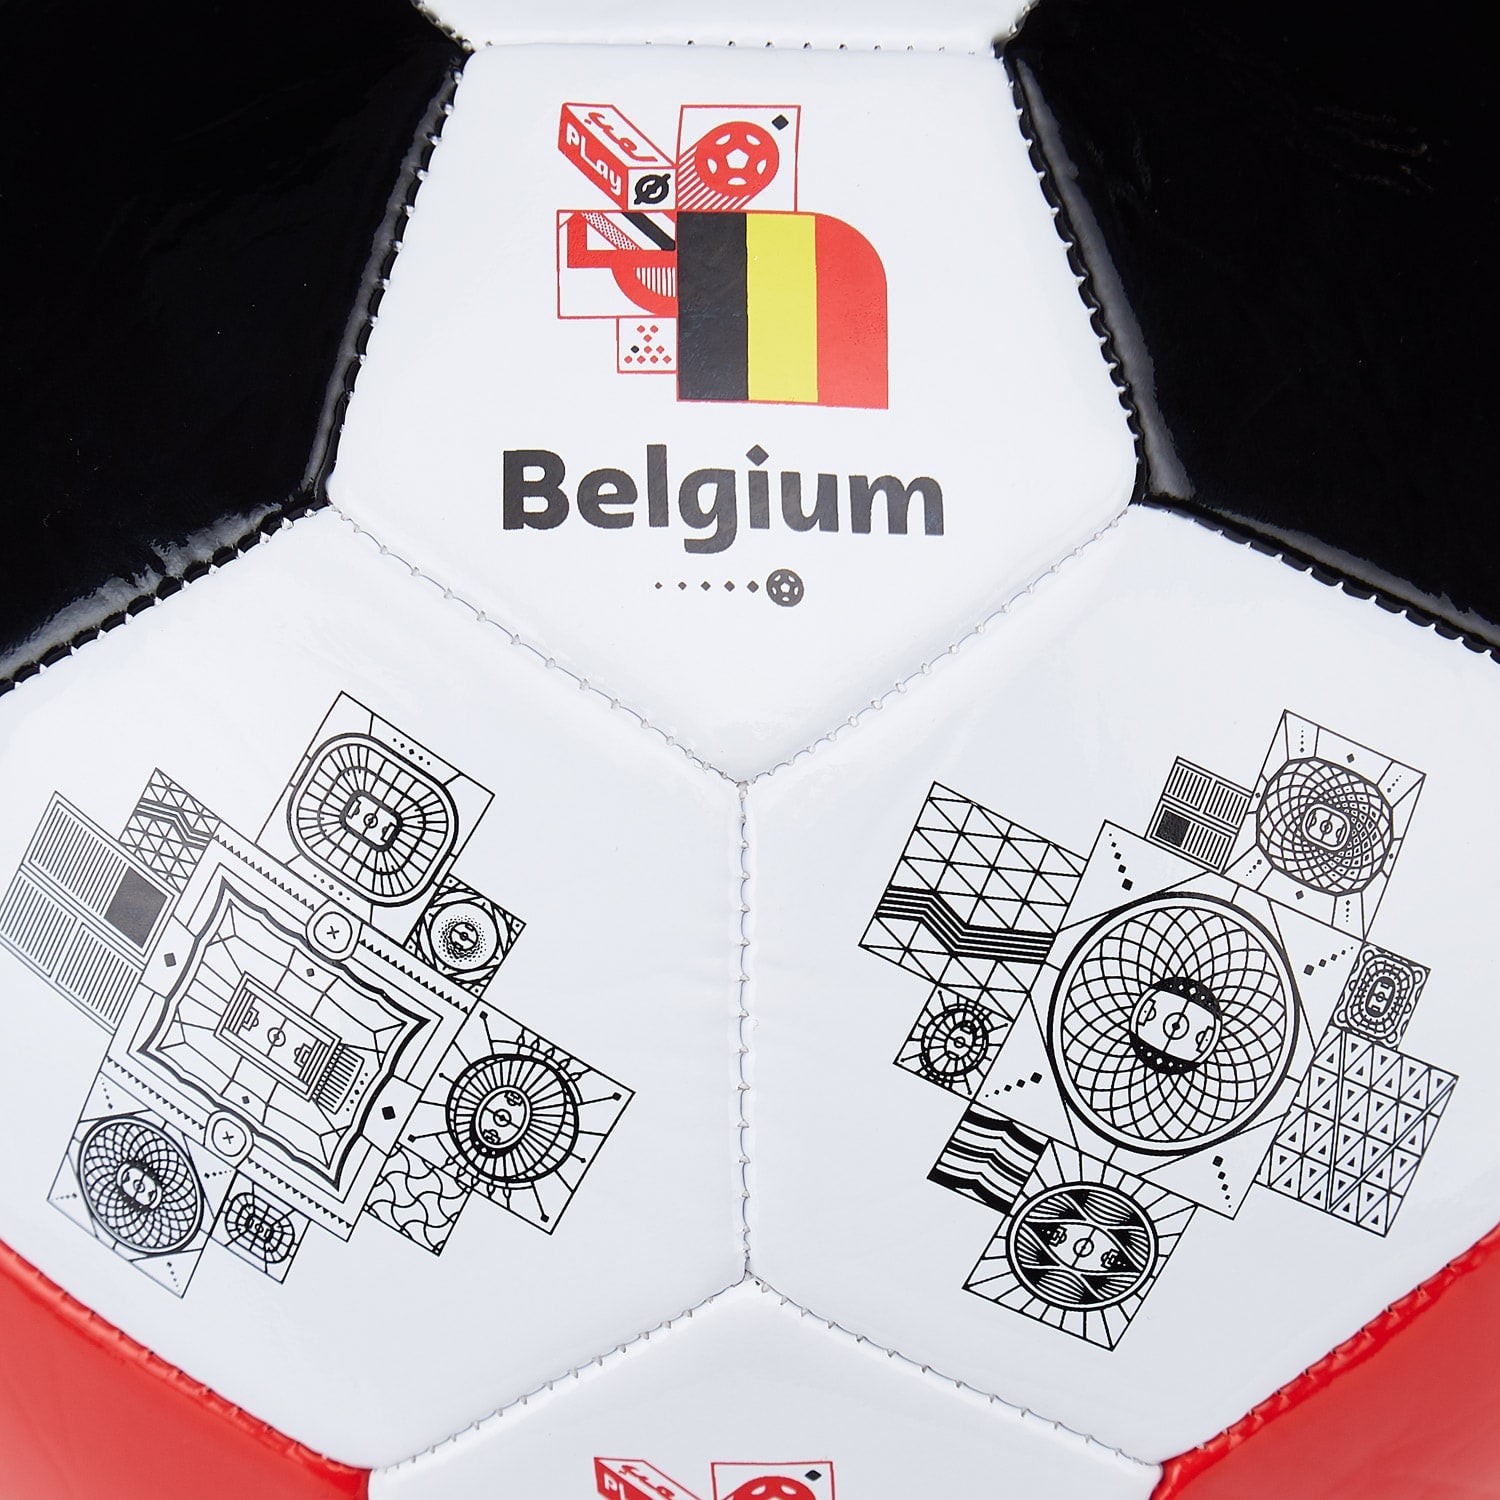 Belgium Soccer Ball World Cup 2022, Mini Size 2 Skills Ball, Leather Game  Ball, Indoor & Outdoor, Kids, Adults, Collector & Game Quality 